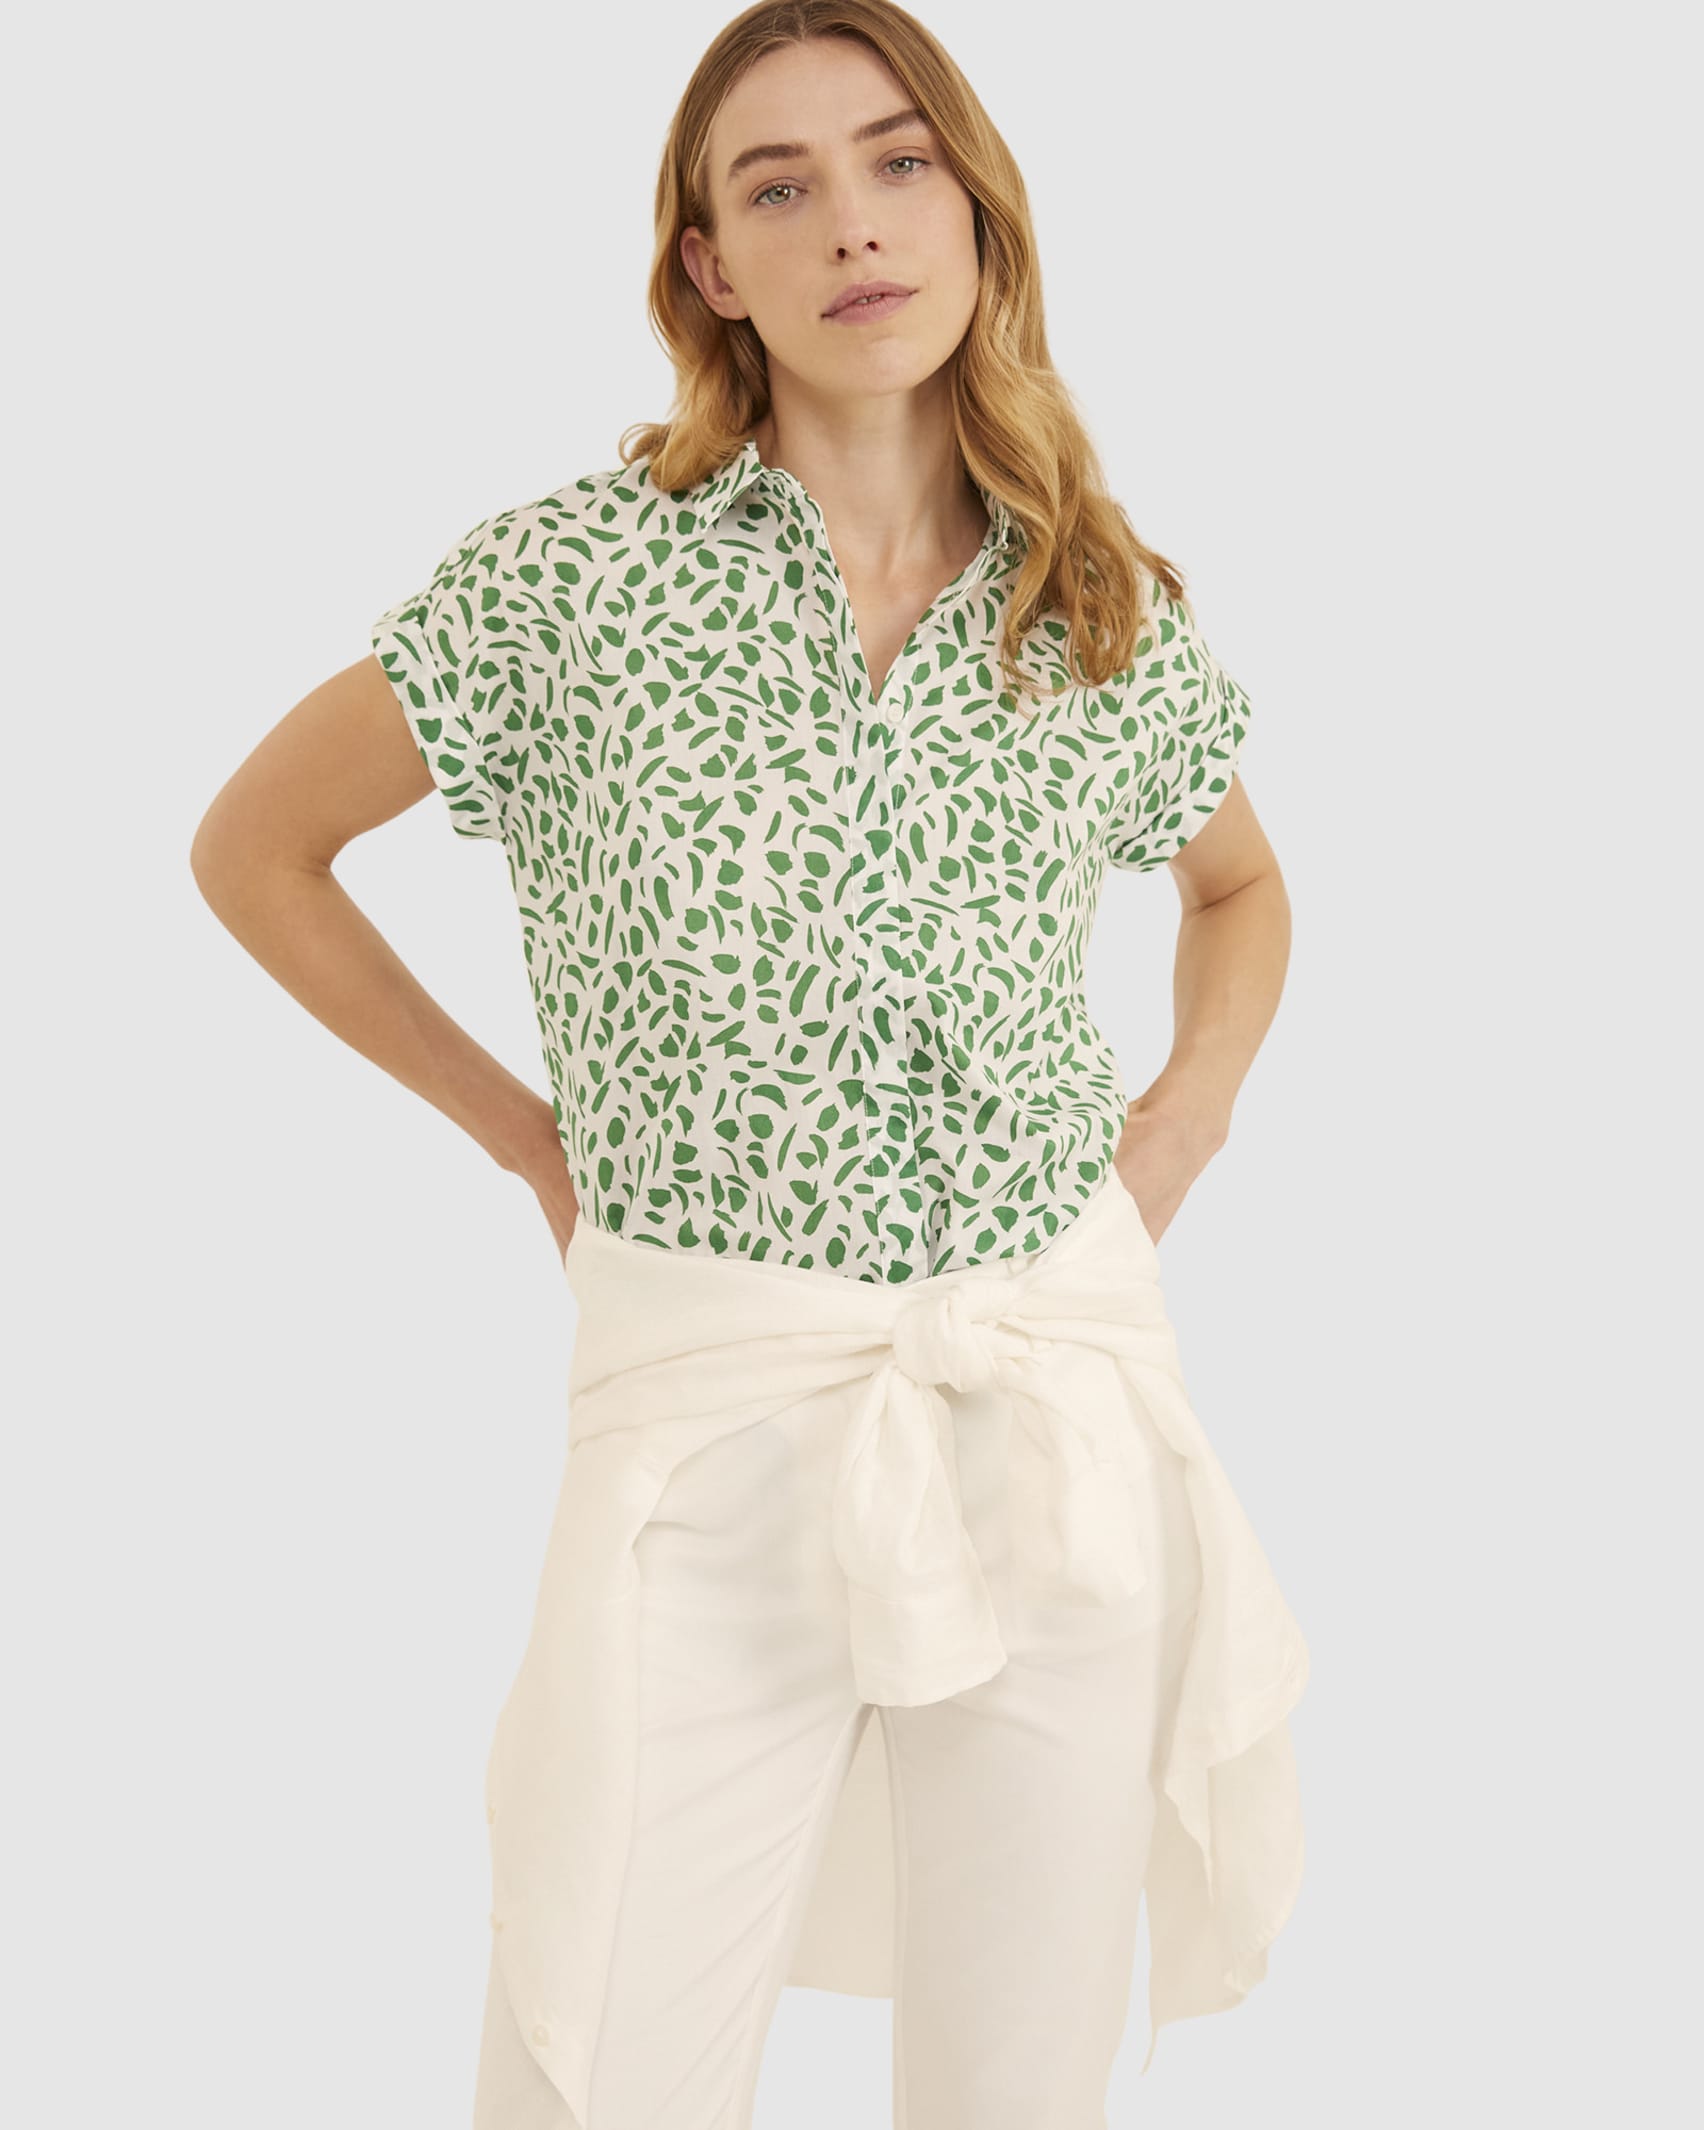 Dashing Short Sleeve Lily Voile Shirt in WHITE/GREEN